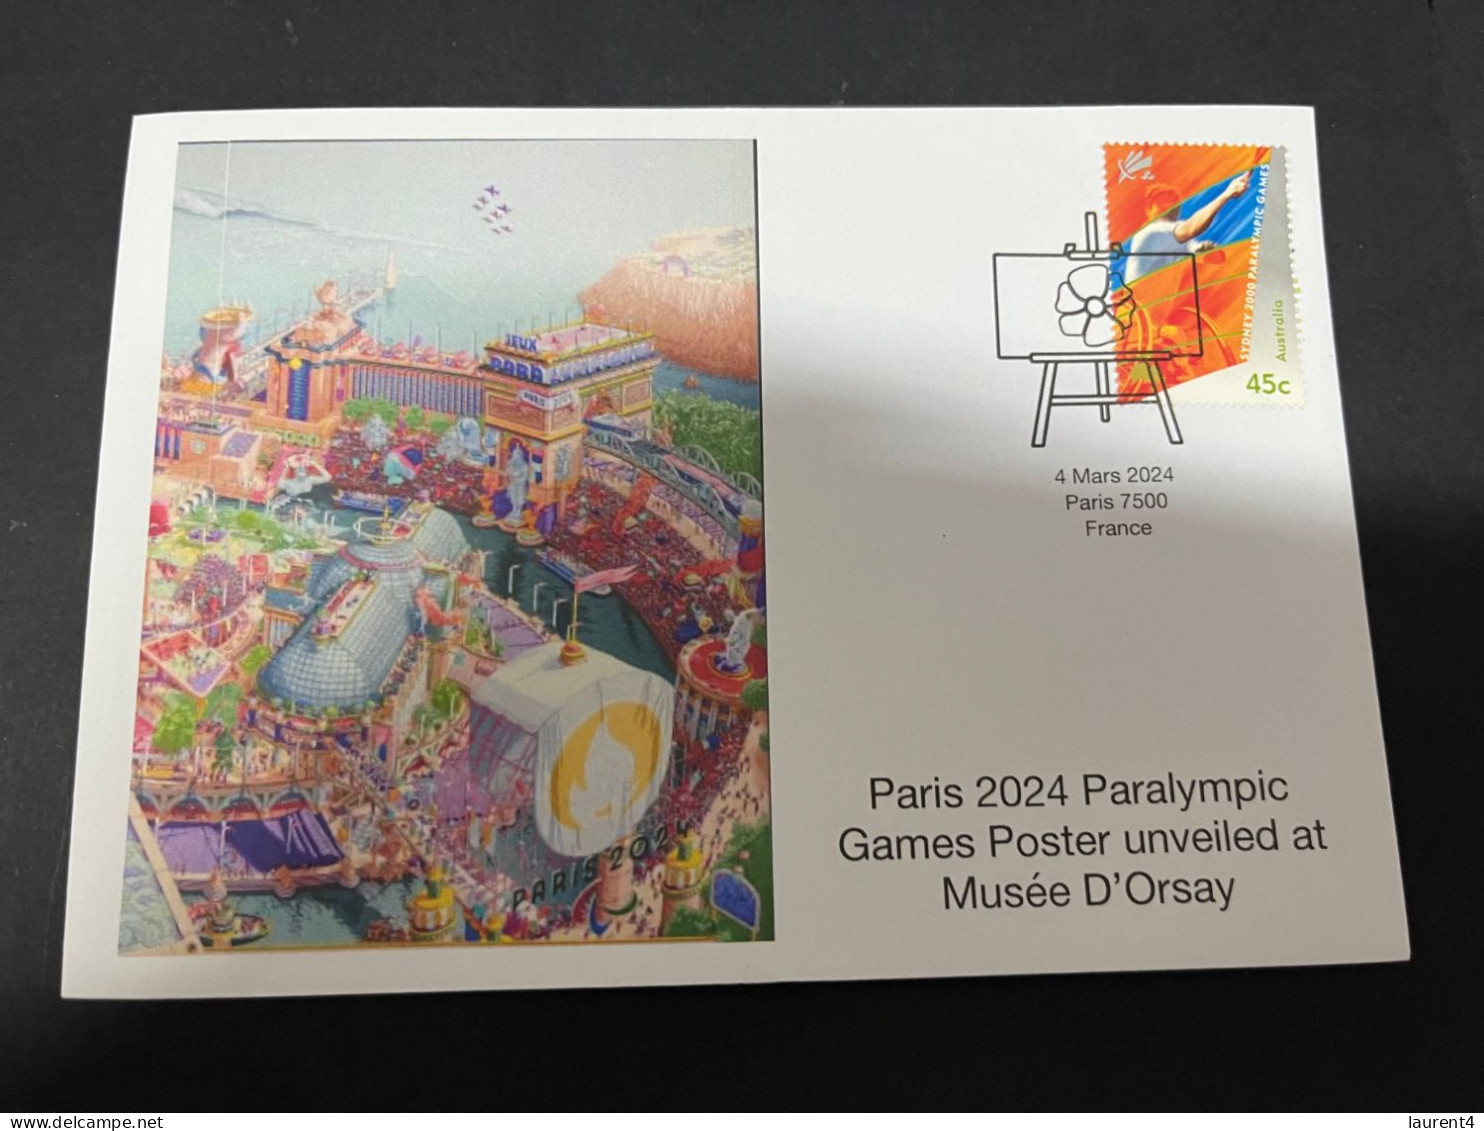 6-3-2024 (2 Y 17) Paris Olympic Games 2024 - 2 Olympic Games Posters Unveil At Musée D'Orsay (Paralympics) - Verano 2024 : París